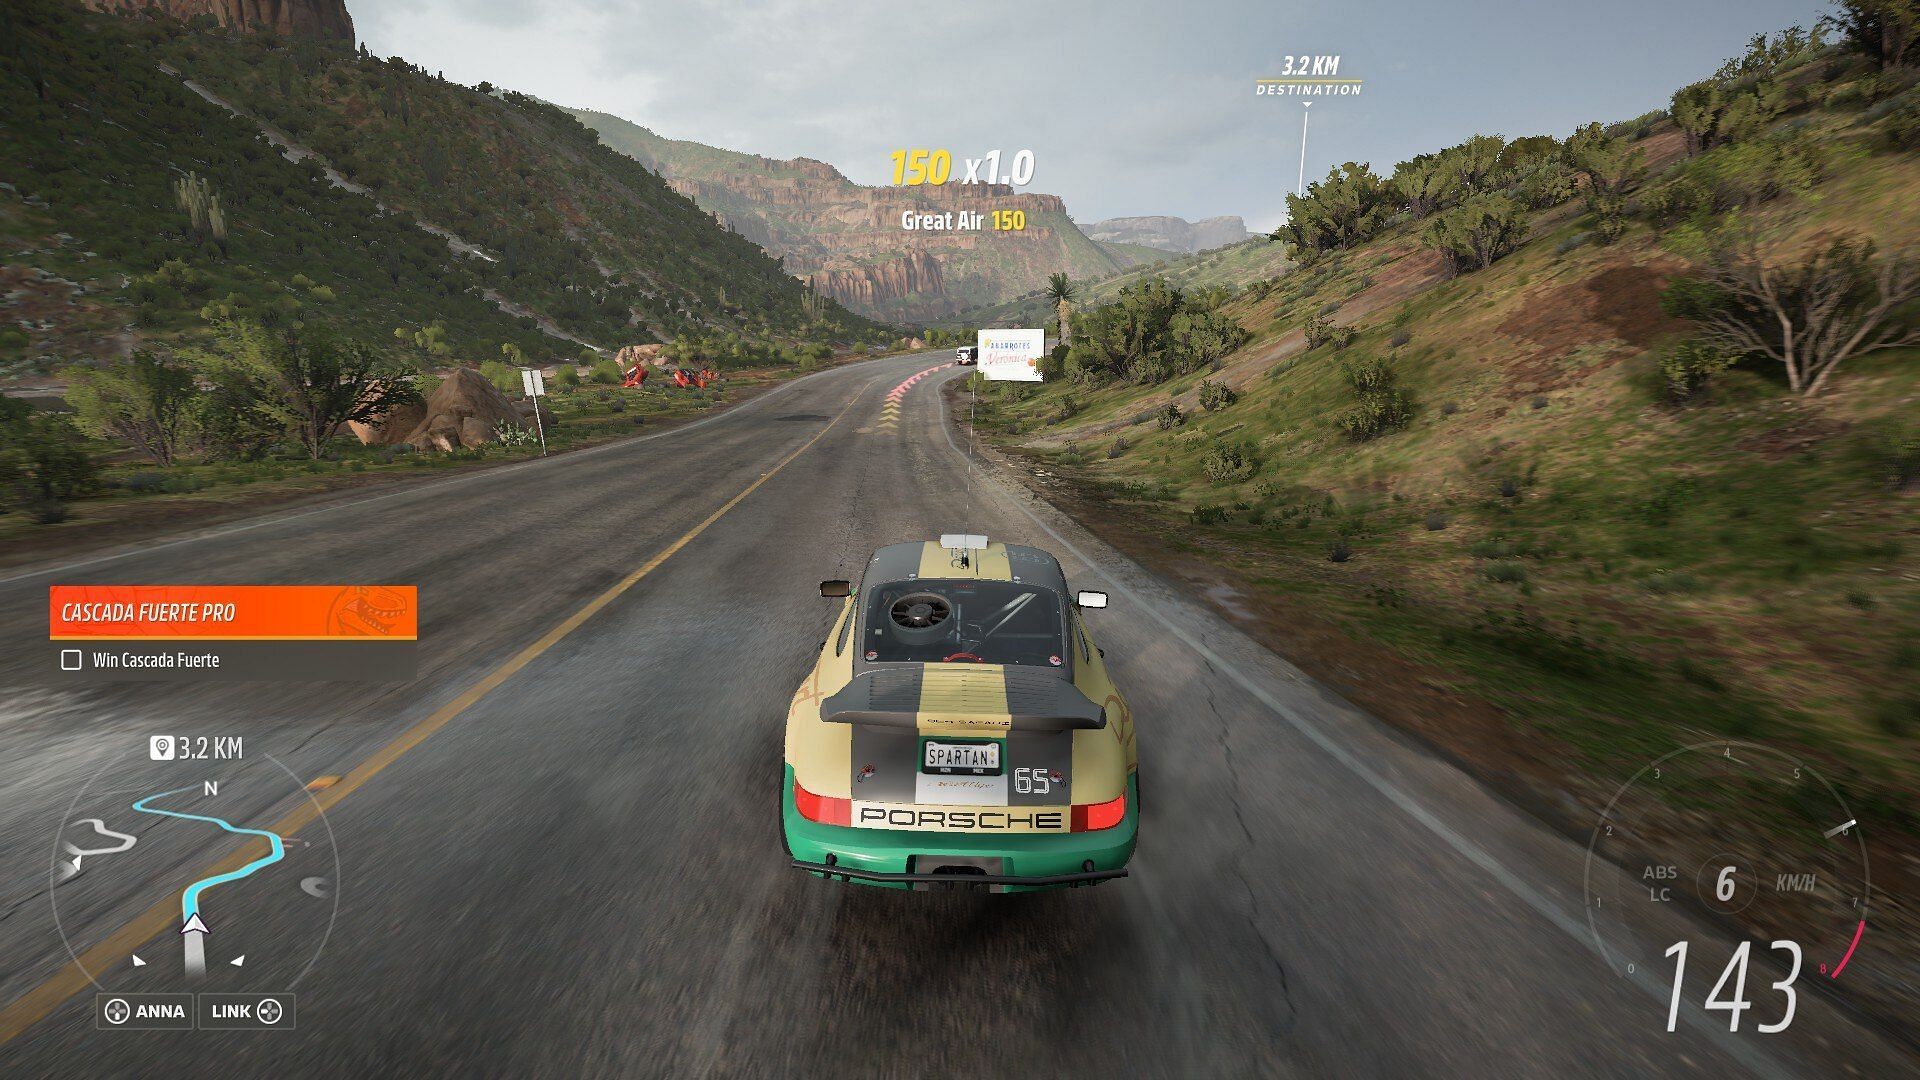 Although Sierra Nueva is mostly an offroad-focused map, it also features ample asphalt tracks for players to cruise the map on their favorite S1, S2, or X-class hypercars (Image via Forza Horizon 5)